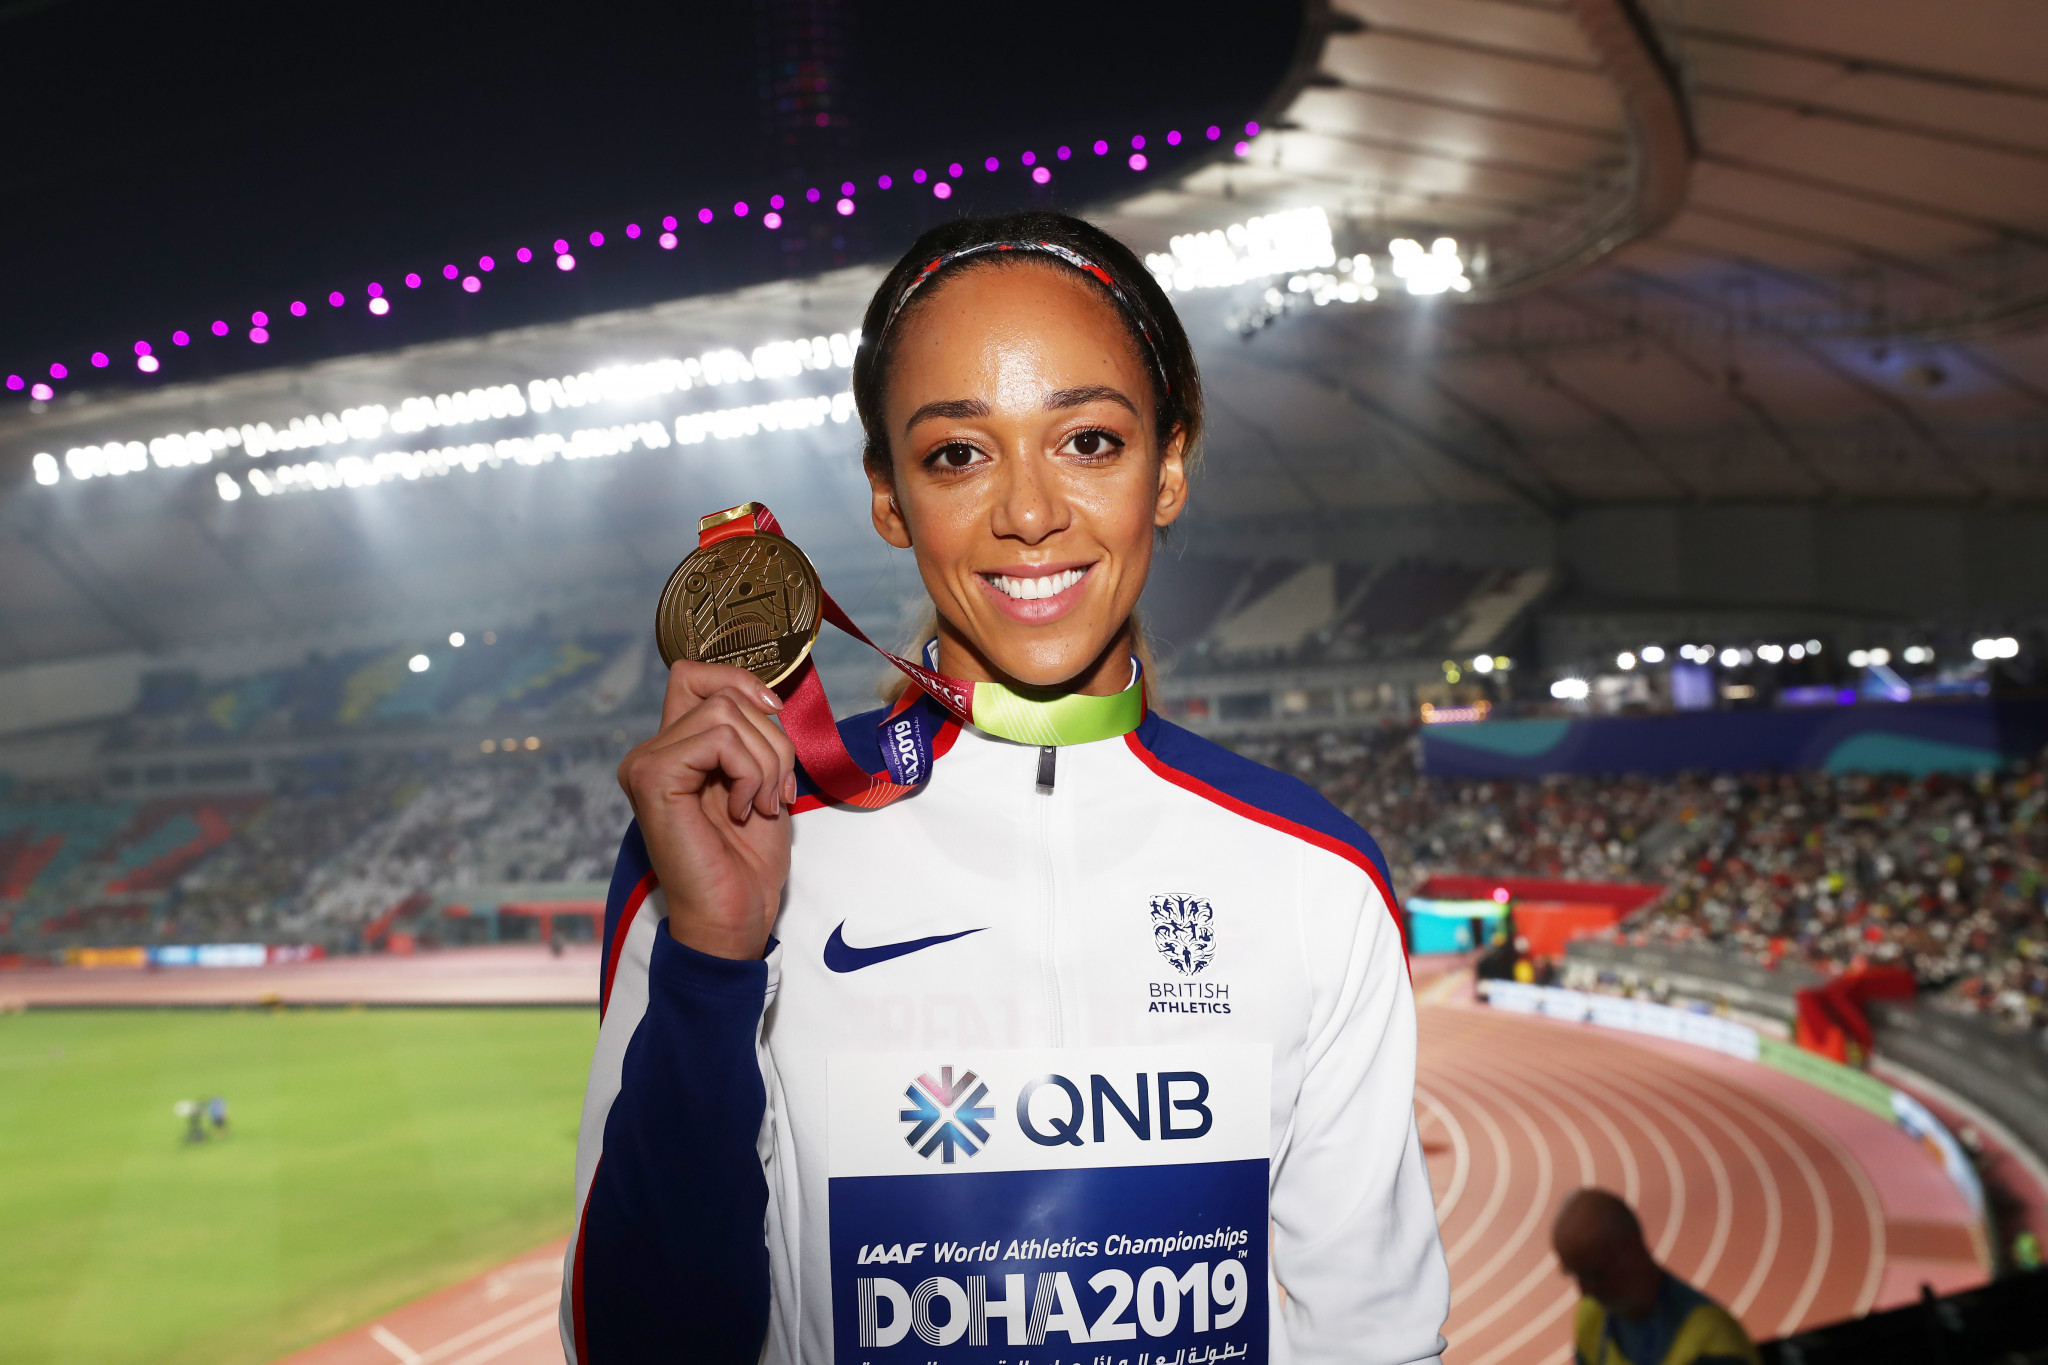 Britain's Katarina Johnson-Thompson received the medal she had won the previous evening in the women's heptathlon ©Getty Images